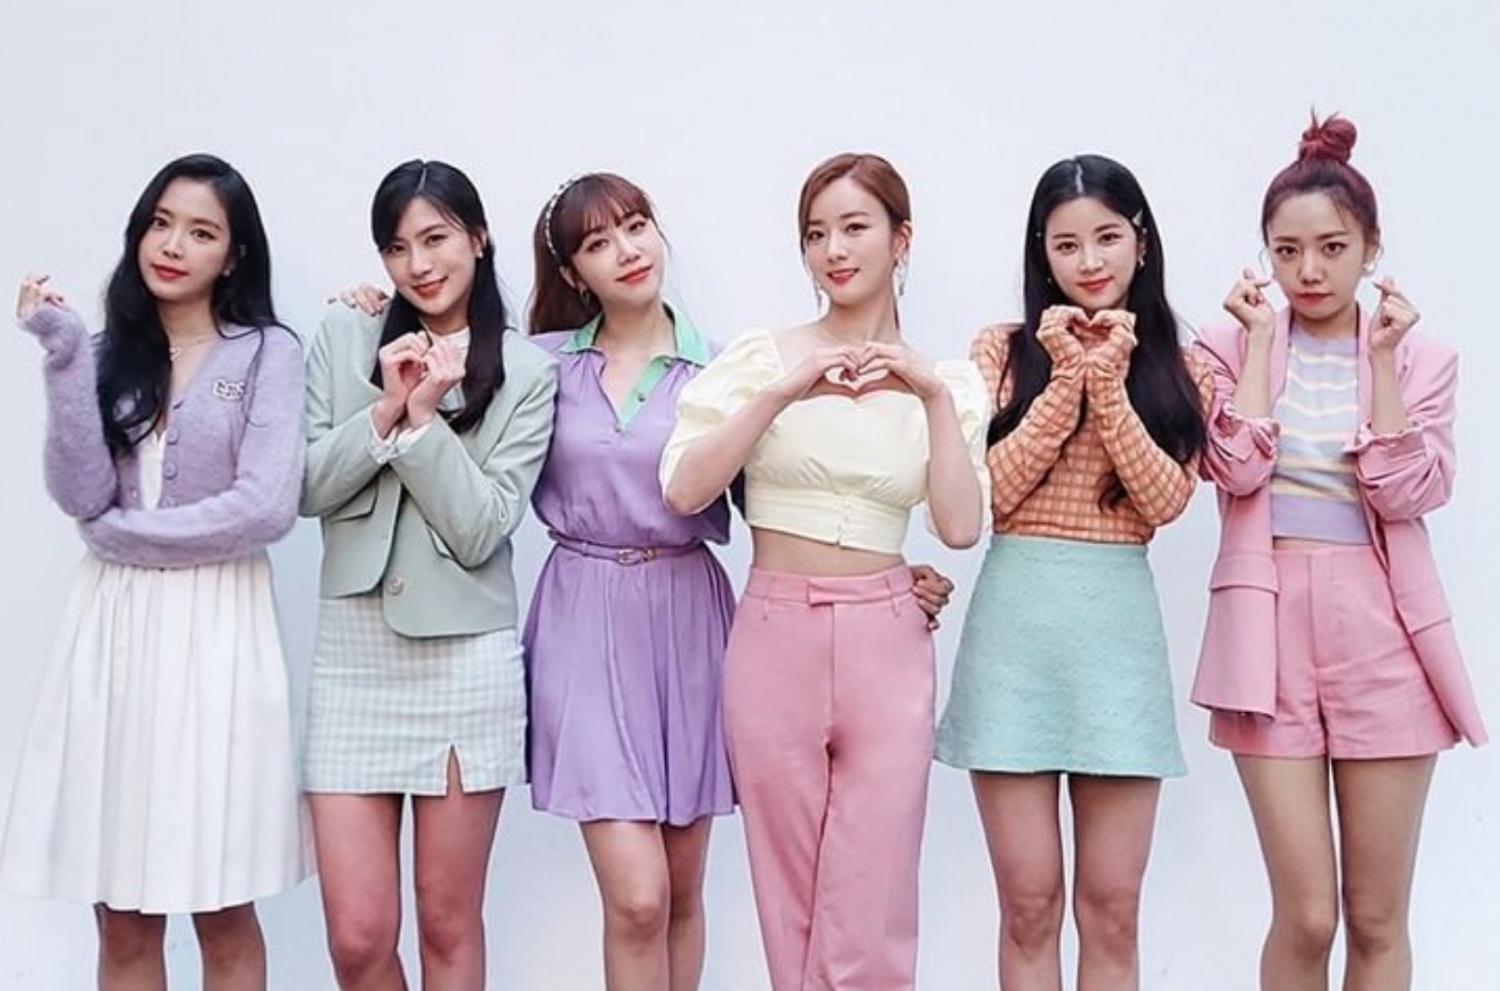 APink members dress up as 'Squid Game' characters at their 10th-anniversary  fan meeting and fans are loving it!